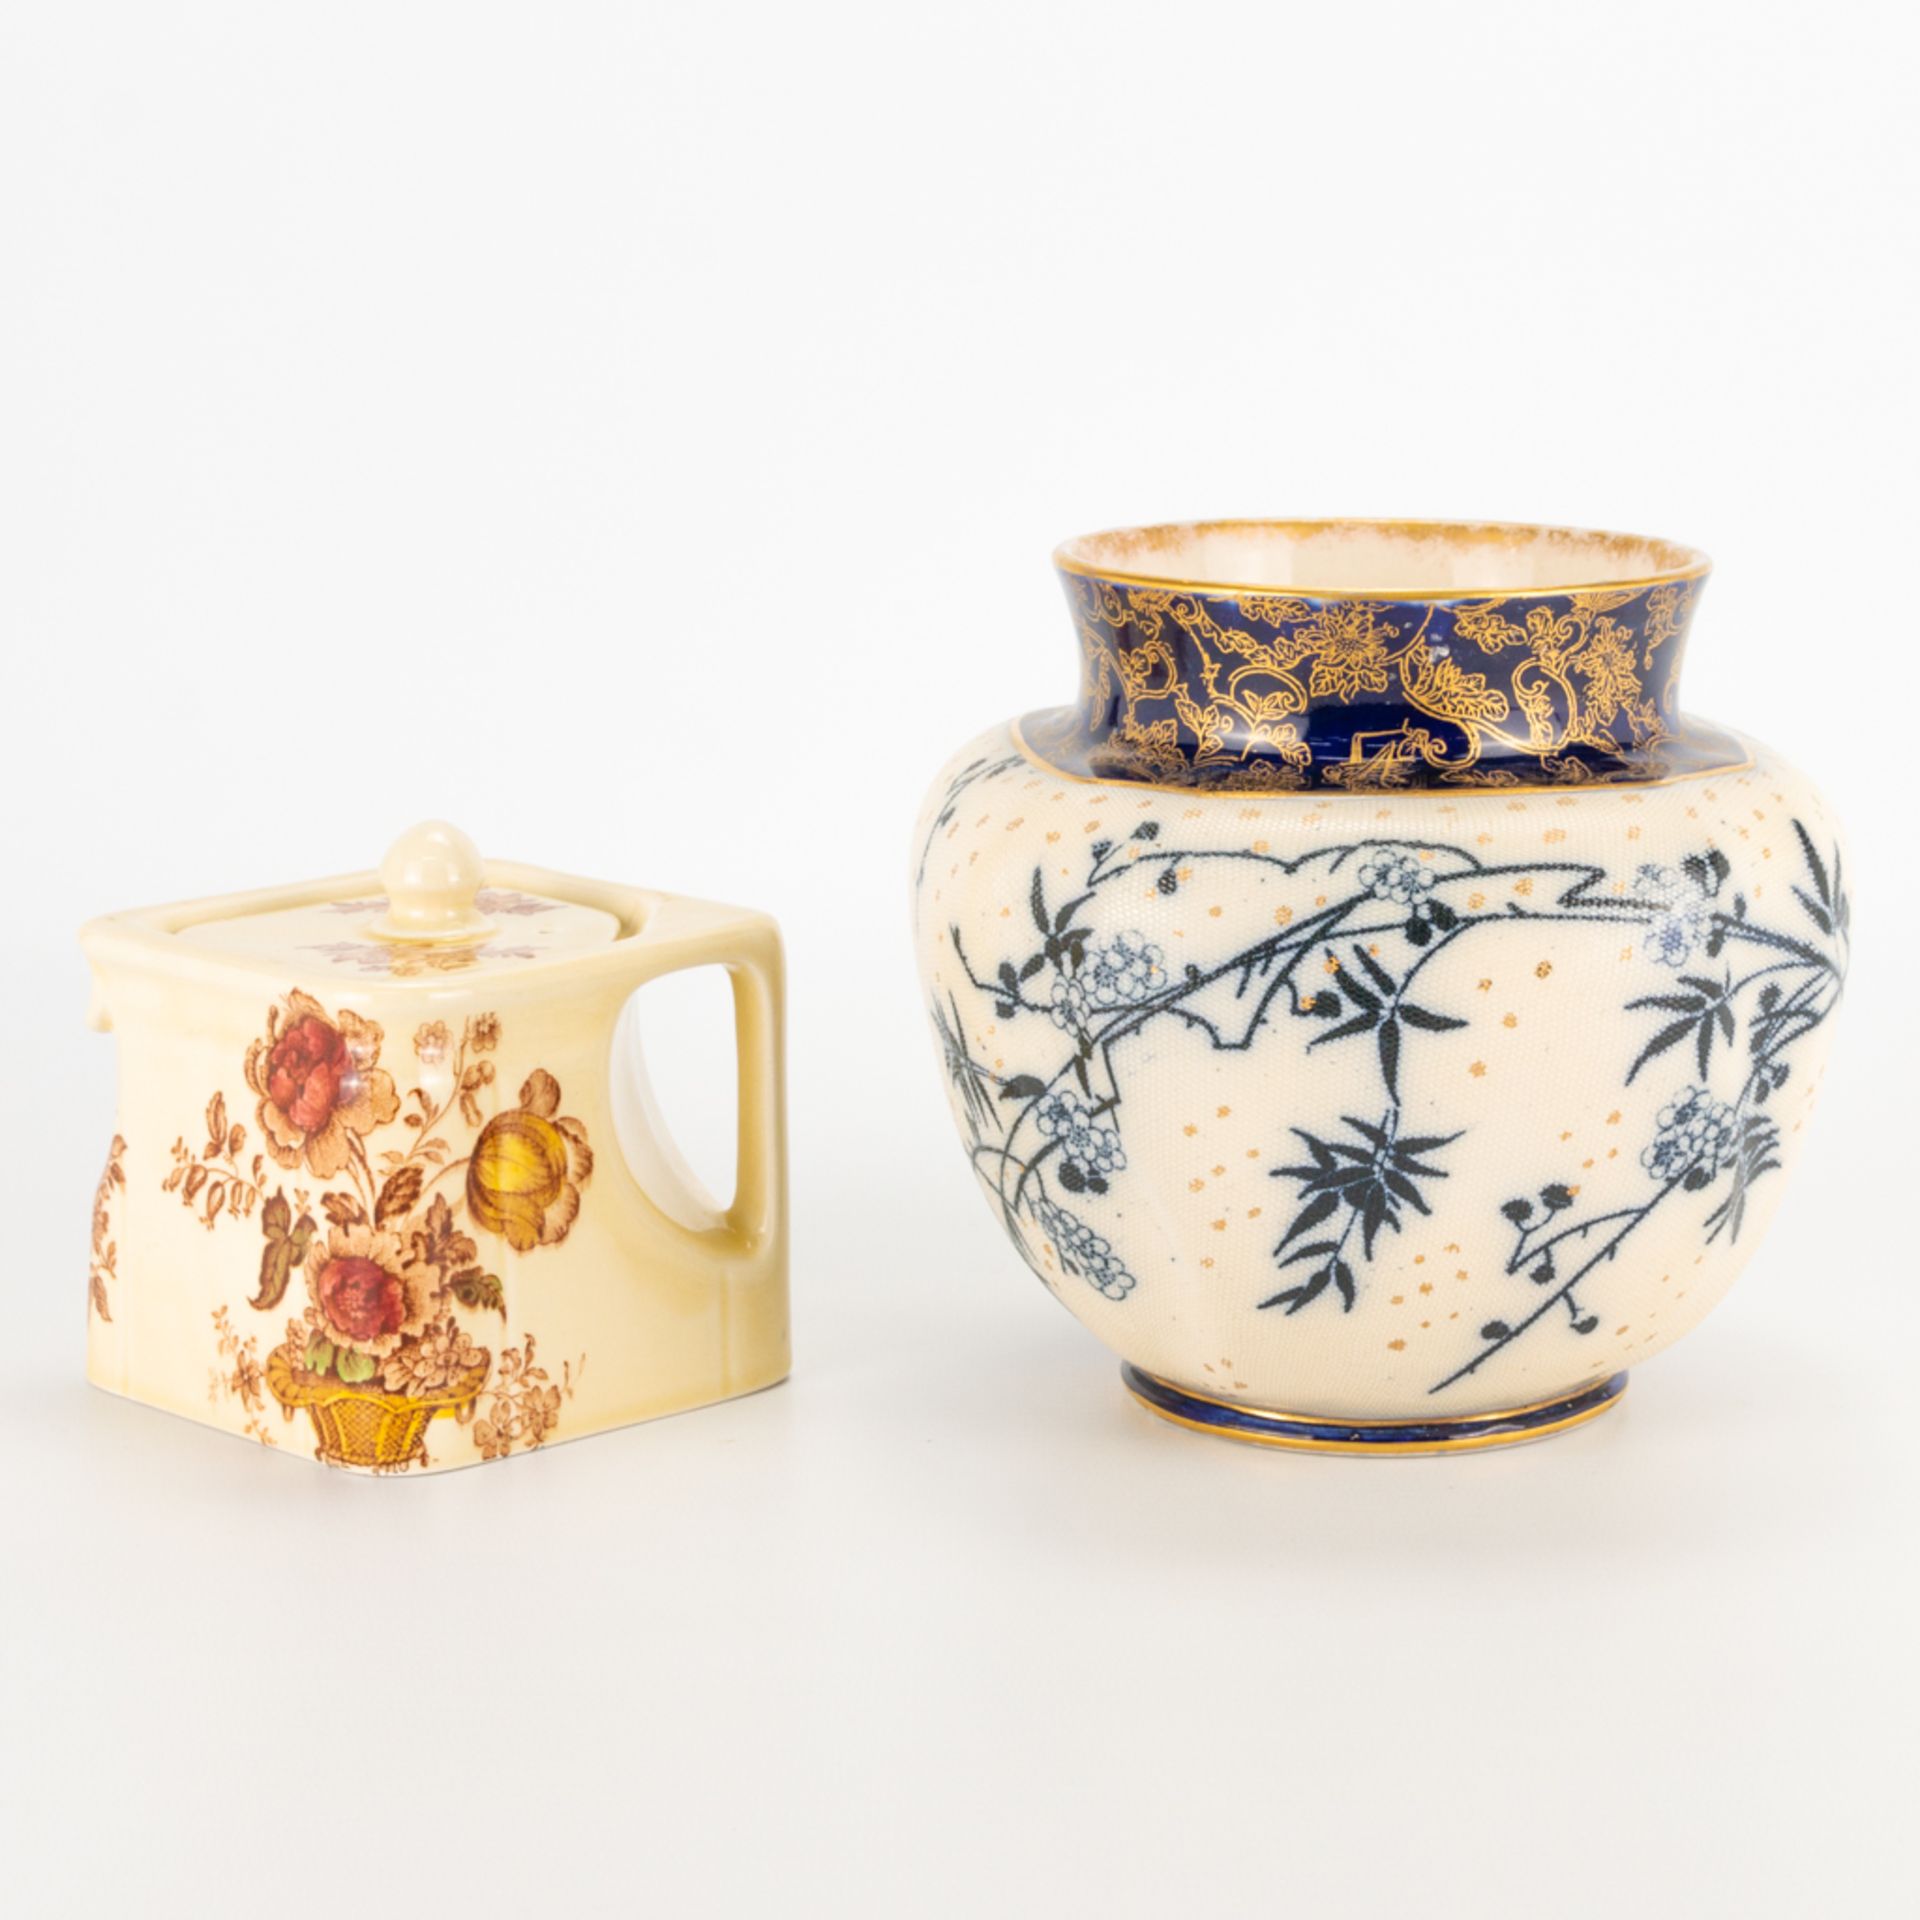 A collection of 2 pieces of English porcelain, a vase made by Doulton and a tea pot made by Clarice - Image 10 of 17